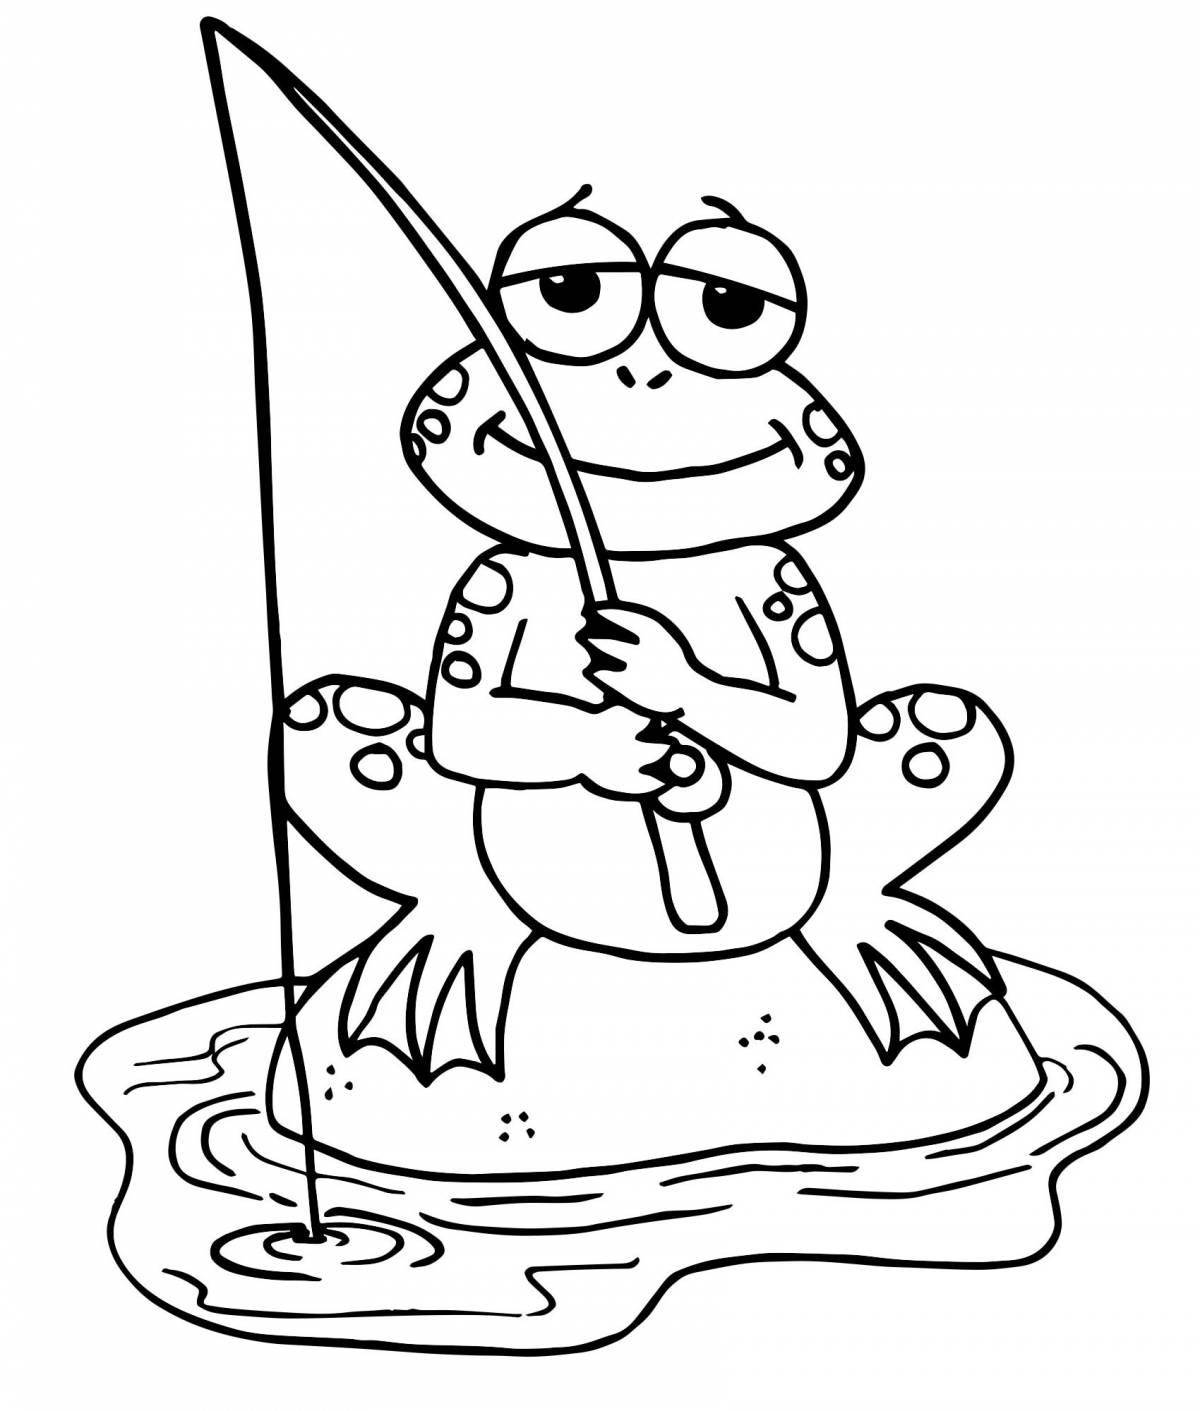 Fat frog coloring pages